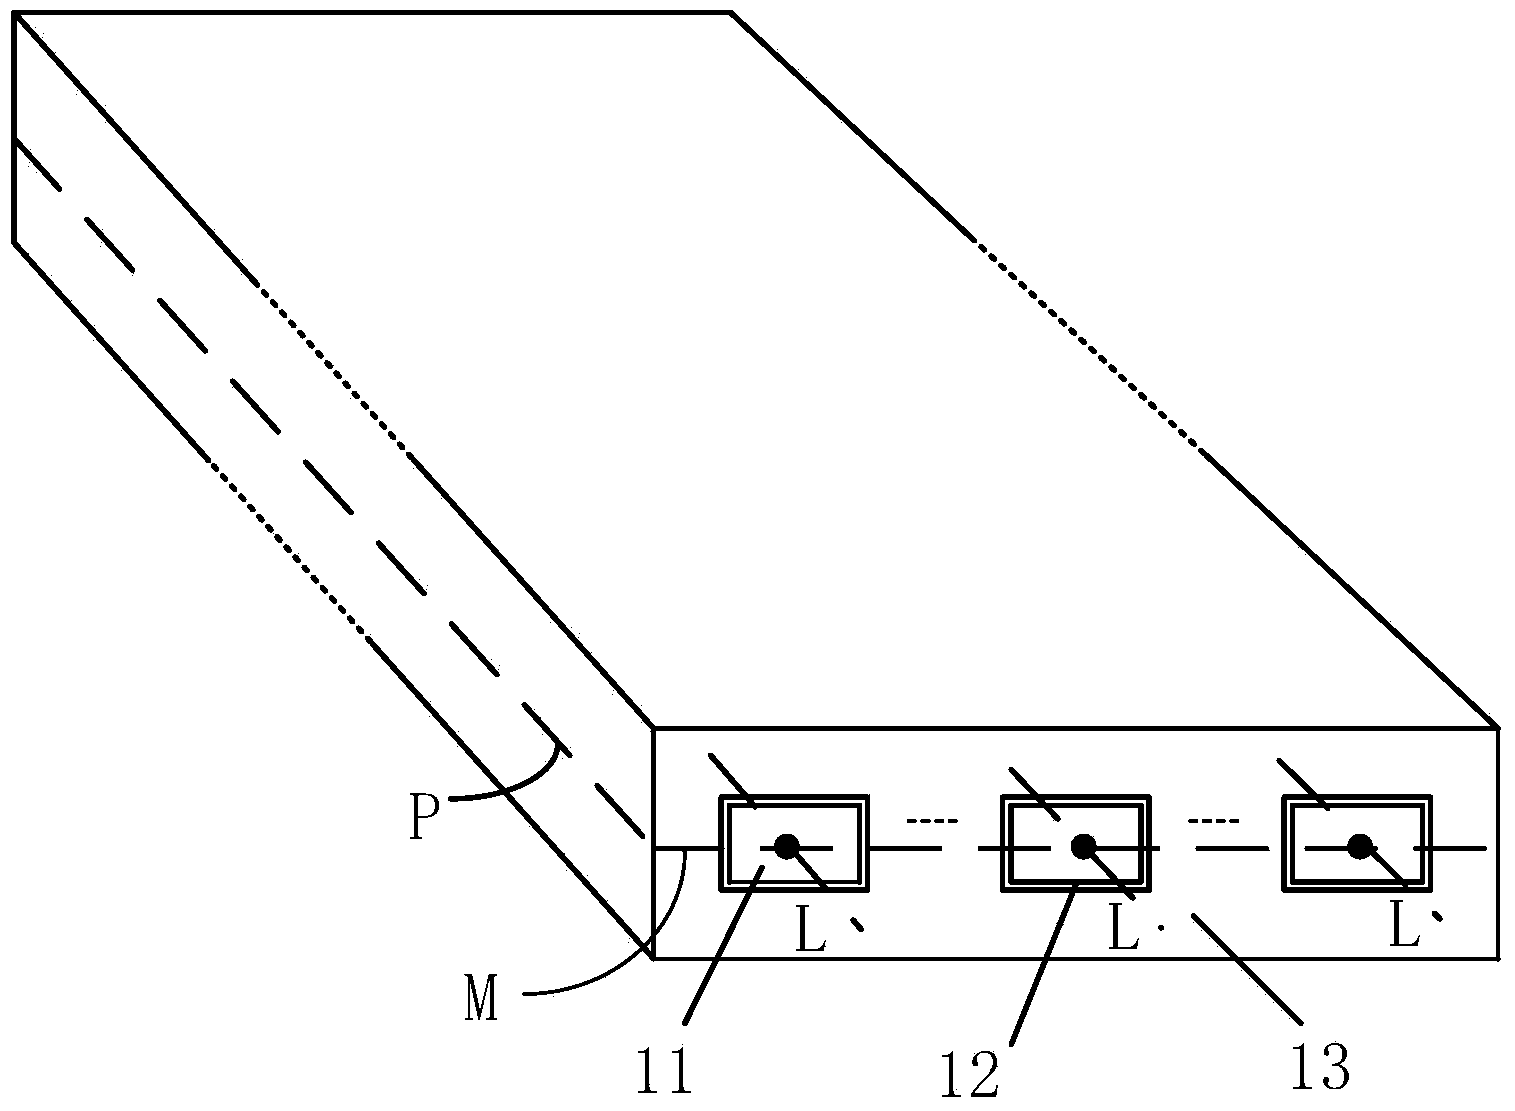 Rectangular-cross-section conductor internally provided with multiple inner cores and capable of reducing AC resistance